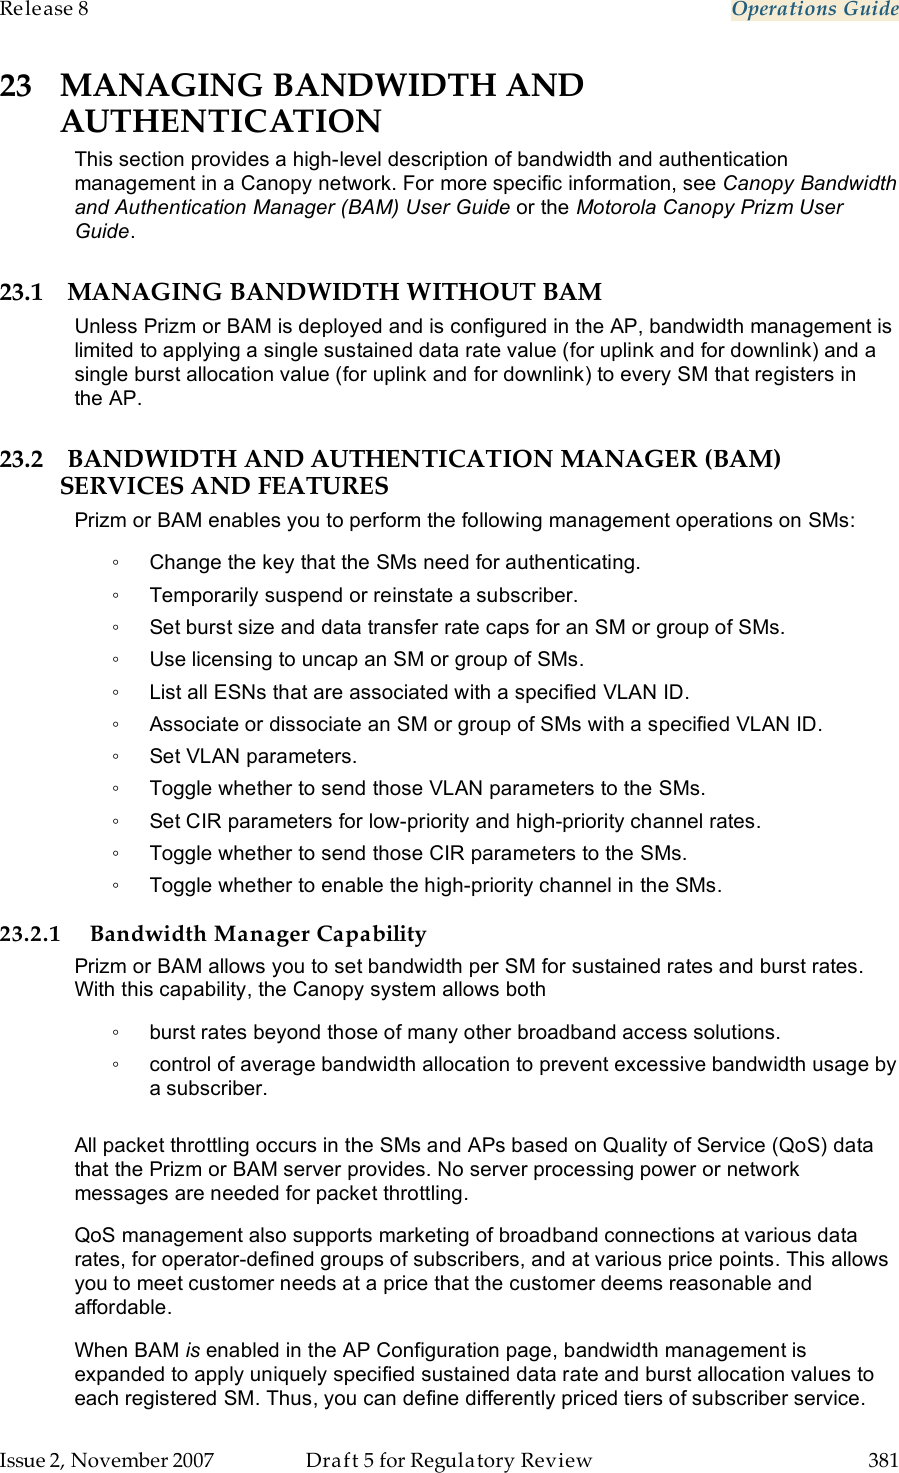 Release 8    Operations Guide   Issue 2, November 2007  Draft 5 for Regulatory Review  381     23 MANAGING BANDWIDTH AND AUTHENTICATION This section provides a high-level description of bandwidth and authentication management in a Canopy network. For more specific information, see Canopy Bandwidth and Authentication Manager (BAM) User Guide or the Motorola Canopy Prizm User Guide. 23.1 MANAGING BANDWIDTH WITHOUT BAM Unless Prizm or BAM is deployed and is configured in the AP, bandwidth management is limited to applying a single sustained data rate value (for uplink and for downlink) and a single burst allocation value (for uplink and for downlink) to every SM that registers in the AP. 23.2 BANDWIDTH AND AUTHENTICATION MANAGER (BAM) SERVICES AND FEATURES Prizm or BAM enables you to perform the following management operations on SMs: ◦  Change the key that the SMs need for authenticating. ◦  Temporarily suspend or reinstate a subscriber. ◦  Set burst size and data transfer rate caps for an SM or group of SMs. ◦  Use licensing to uncap an SM or group of SMs. ◦  List all ESNs that are associated with a specified VLAN ID. ◦  Associate or dissociate an SM or group of SMs with a specified VLAN ID. ◦  Set VLAN parameters. ◦  Toggle whether to send those VLAN parameters to the SMs. ◦  Set CIR parameters for low-priority and high-priority channel rates. ◦  Toggle whether to send those CIR parameters to the SMs. ◦  Toggle whether to enable the high-priority channel in the SMs. 23.2.1 Bandwidth Manager Capability Prizm or BAM allows you to set bandwidth per SM for sustained rates and burst rates. With this capability, the Canopy system allows both ◦  burst rates beyond those of many other broadband access solutions. ◦  control of average bandwidth allocation to prevent excessive bandwidth usage by a subscriber.  All packet throttling occurs in the SMs and APs based on Quality of Service (QoS) data that the Prizm or BAM server provides. No server processing power or network messages are needed for packet throttling. QoS management also supports marketing of broadband connections at various data rates, for operator-defined groups of subscribers, and at various price points. This allows you to meet customer needs at a price that the customer deems reasonable and affordable. When BAM is enabled in the AP Configuration page, bandwidth management is expanded to apply uniquely specified sustained data rate and burst allocation values to each registered SM. Thus, you can define differently priced tiers of subscriber service. 